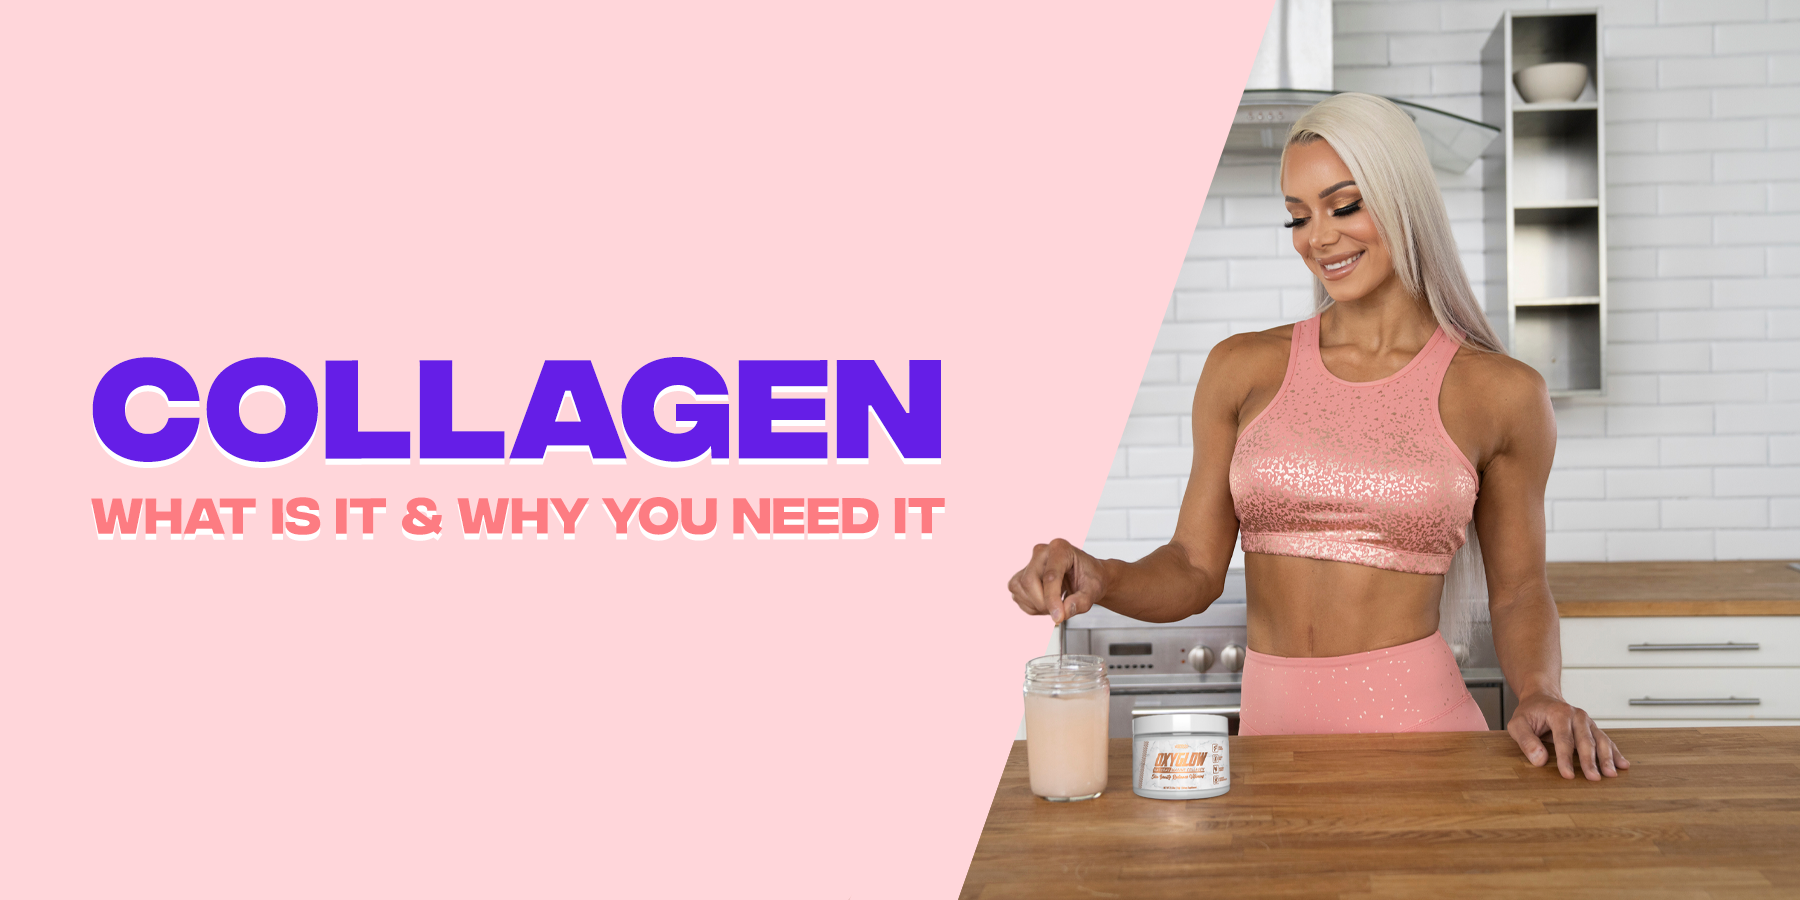 Collagen: What Is It and Why You Need It